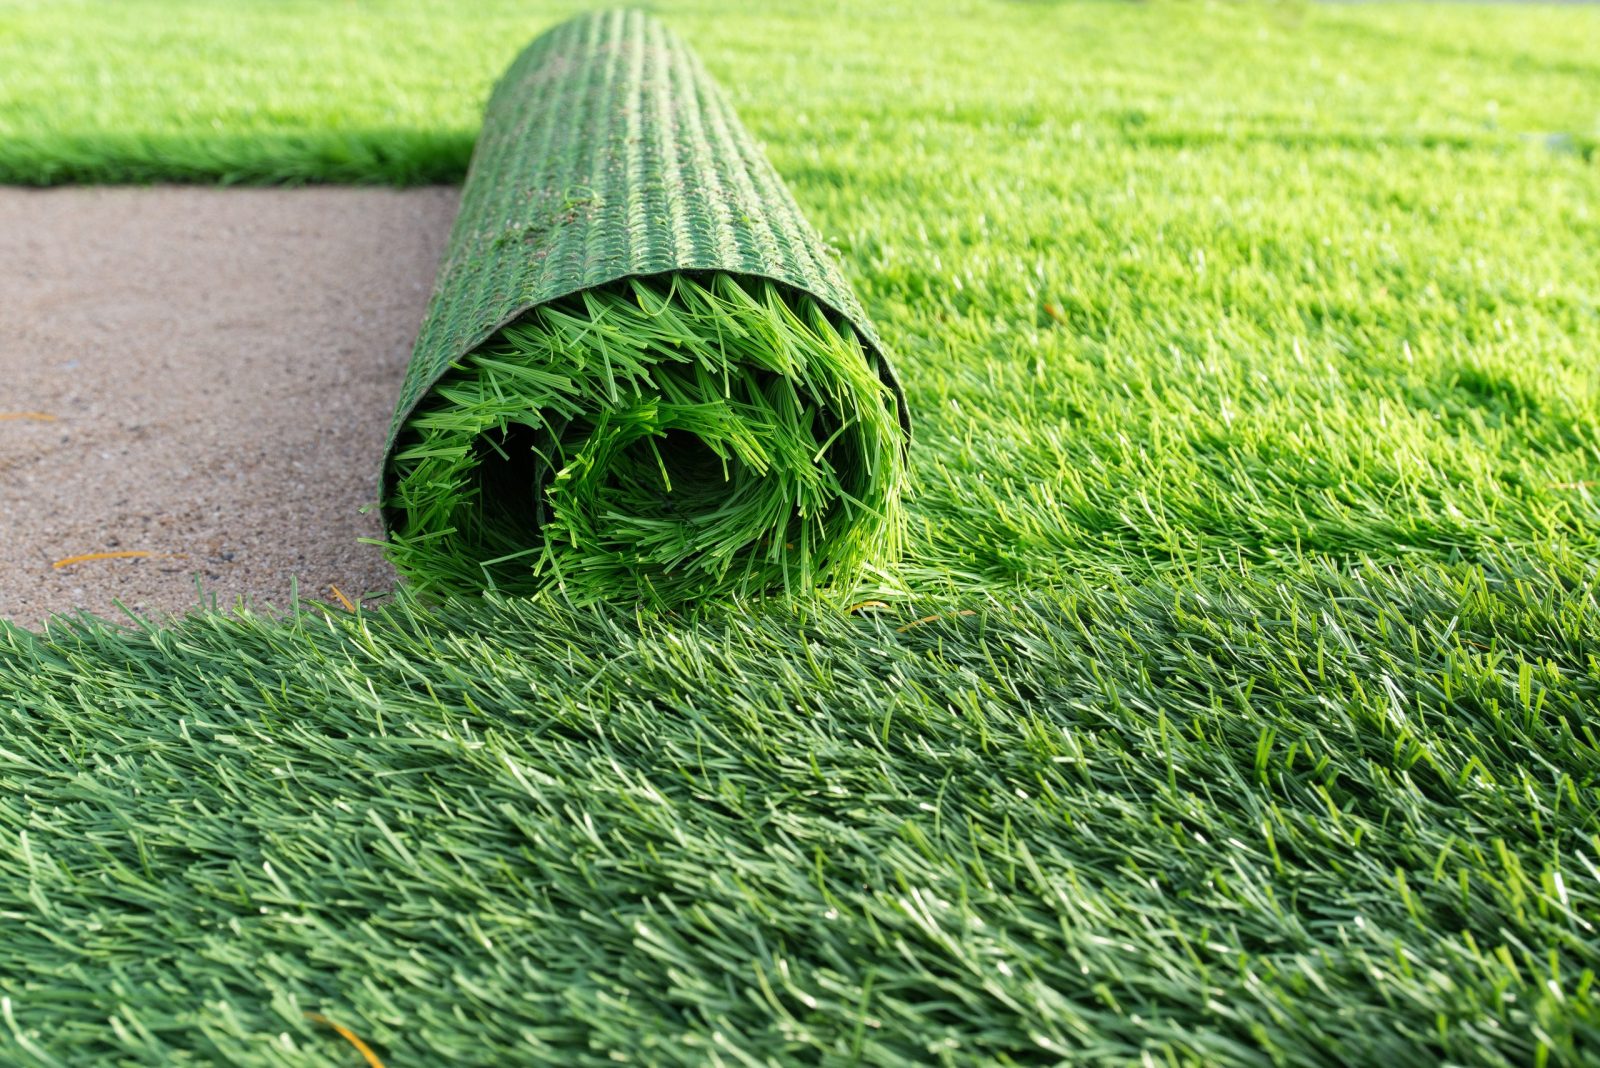 shutterstock_208608061-scaled-e1680312276261.jpgfit16002C1068ssl1 Growing Concerns Over Sustainability of Plastic Artificial Grass